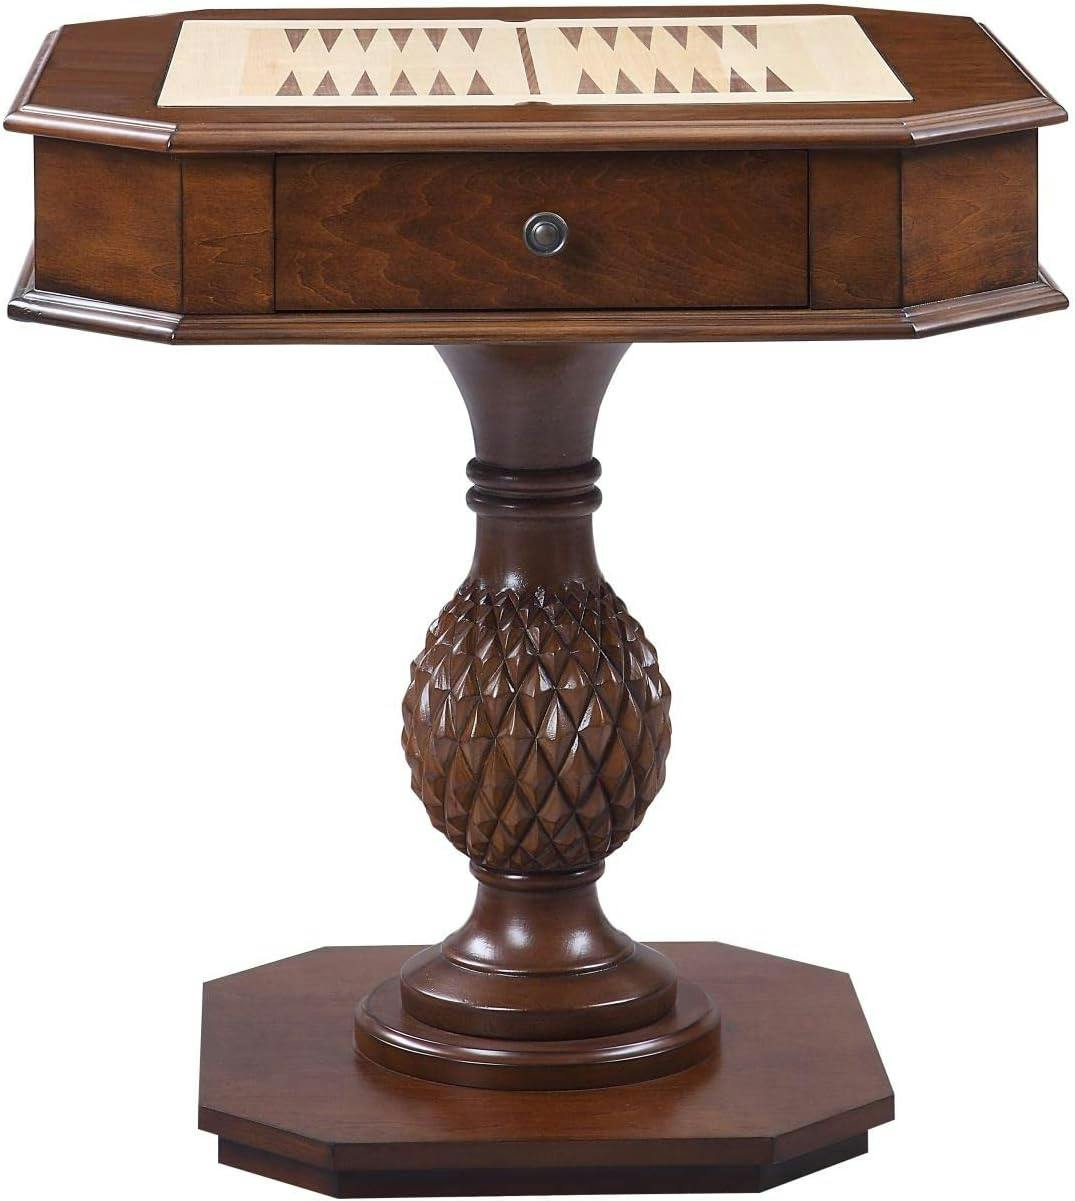 Heirloom Cherry Wood Game Table with Reversible Tray and Drawer